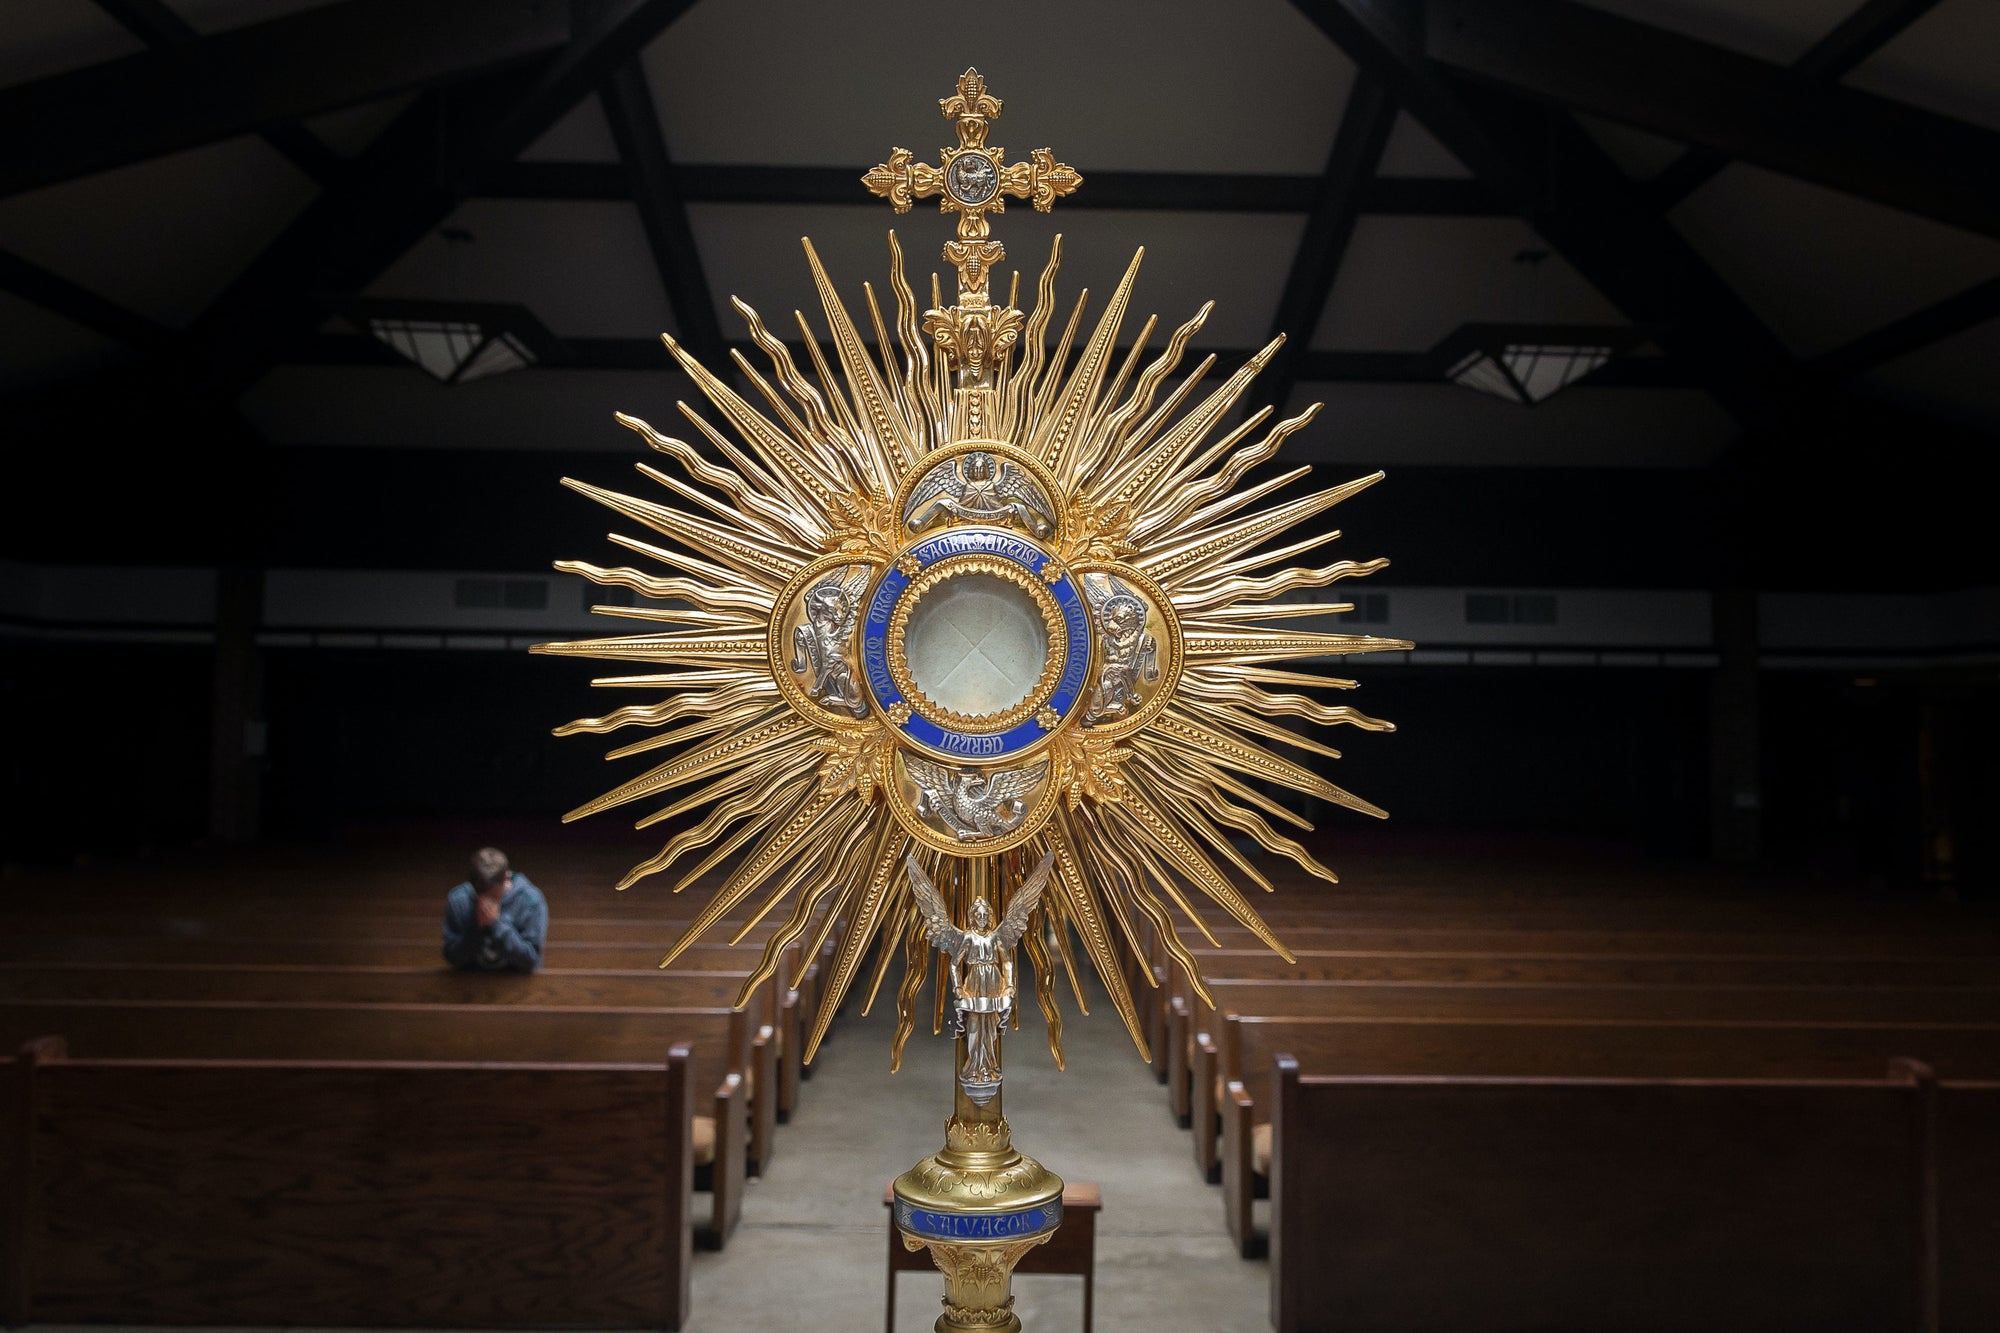 Homily by St. Josemaria Escriva for the Feast of Corpus Christi